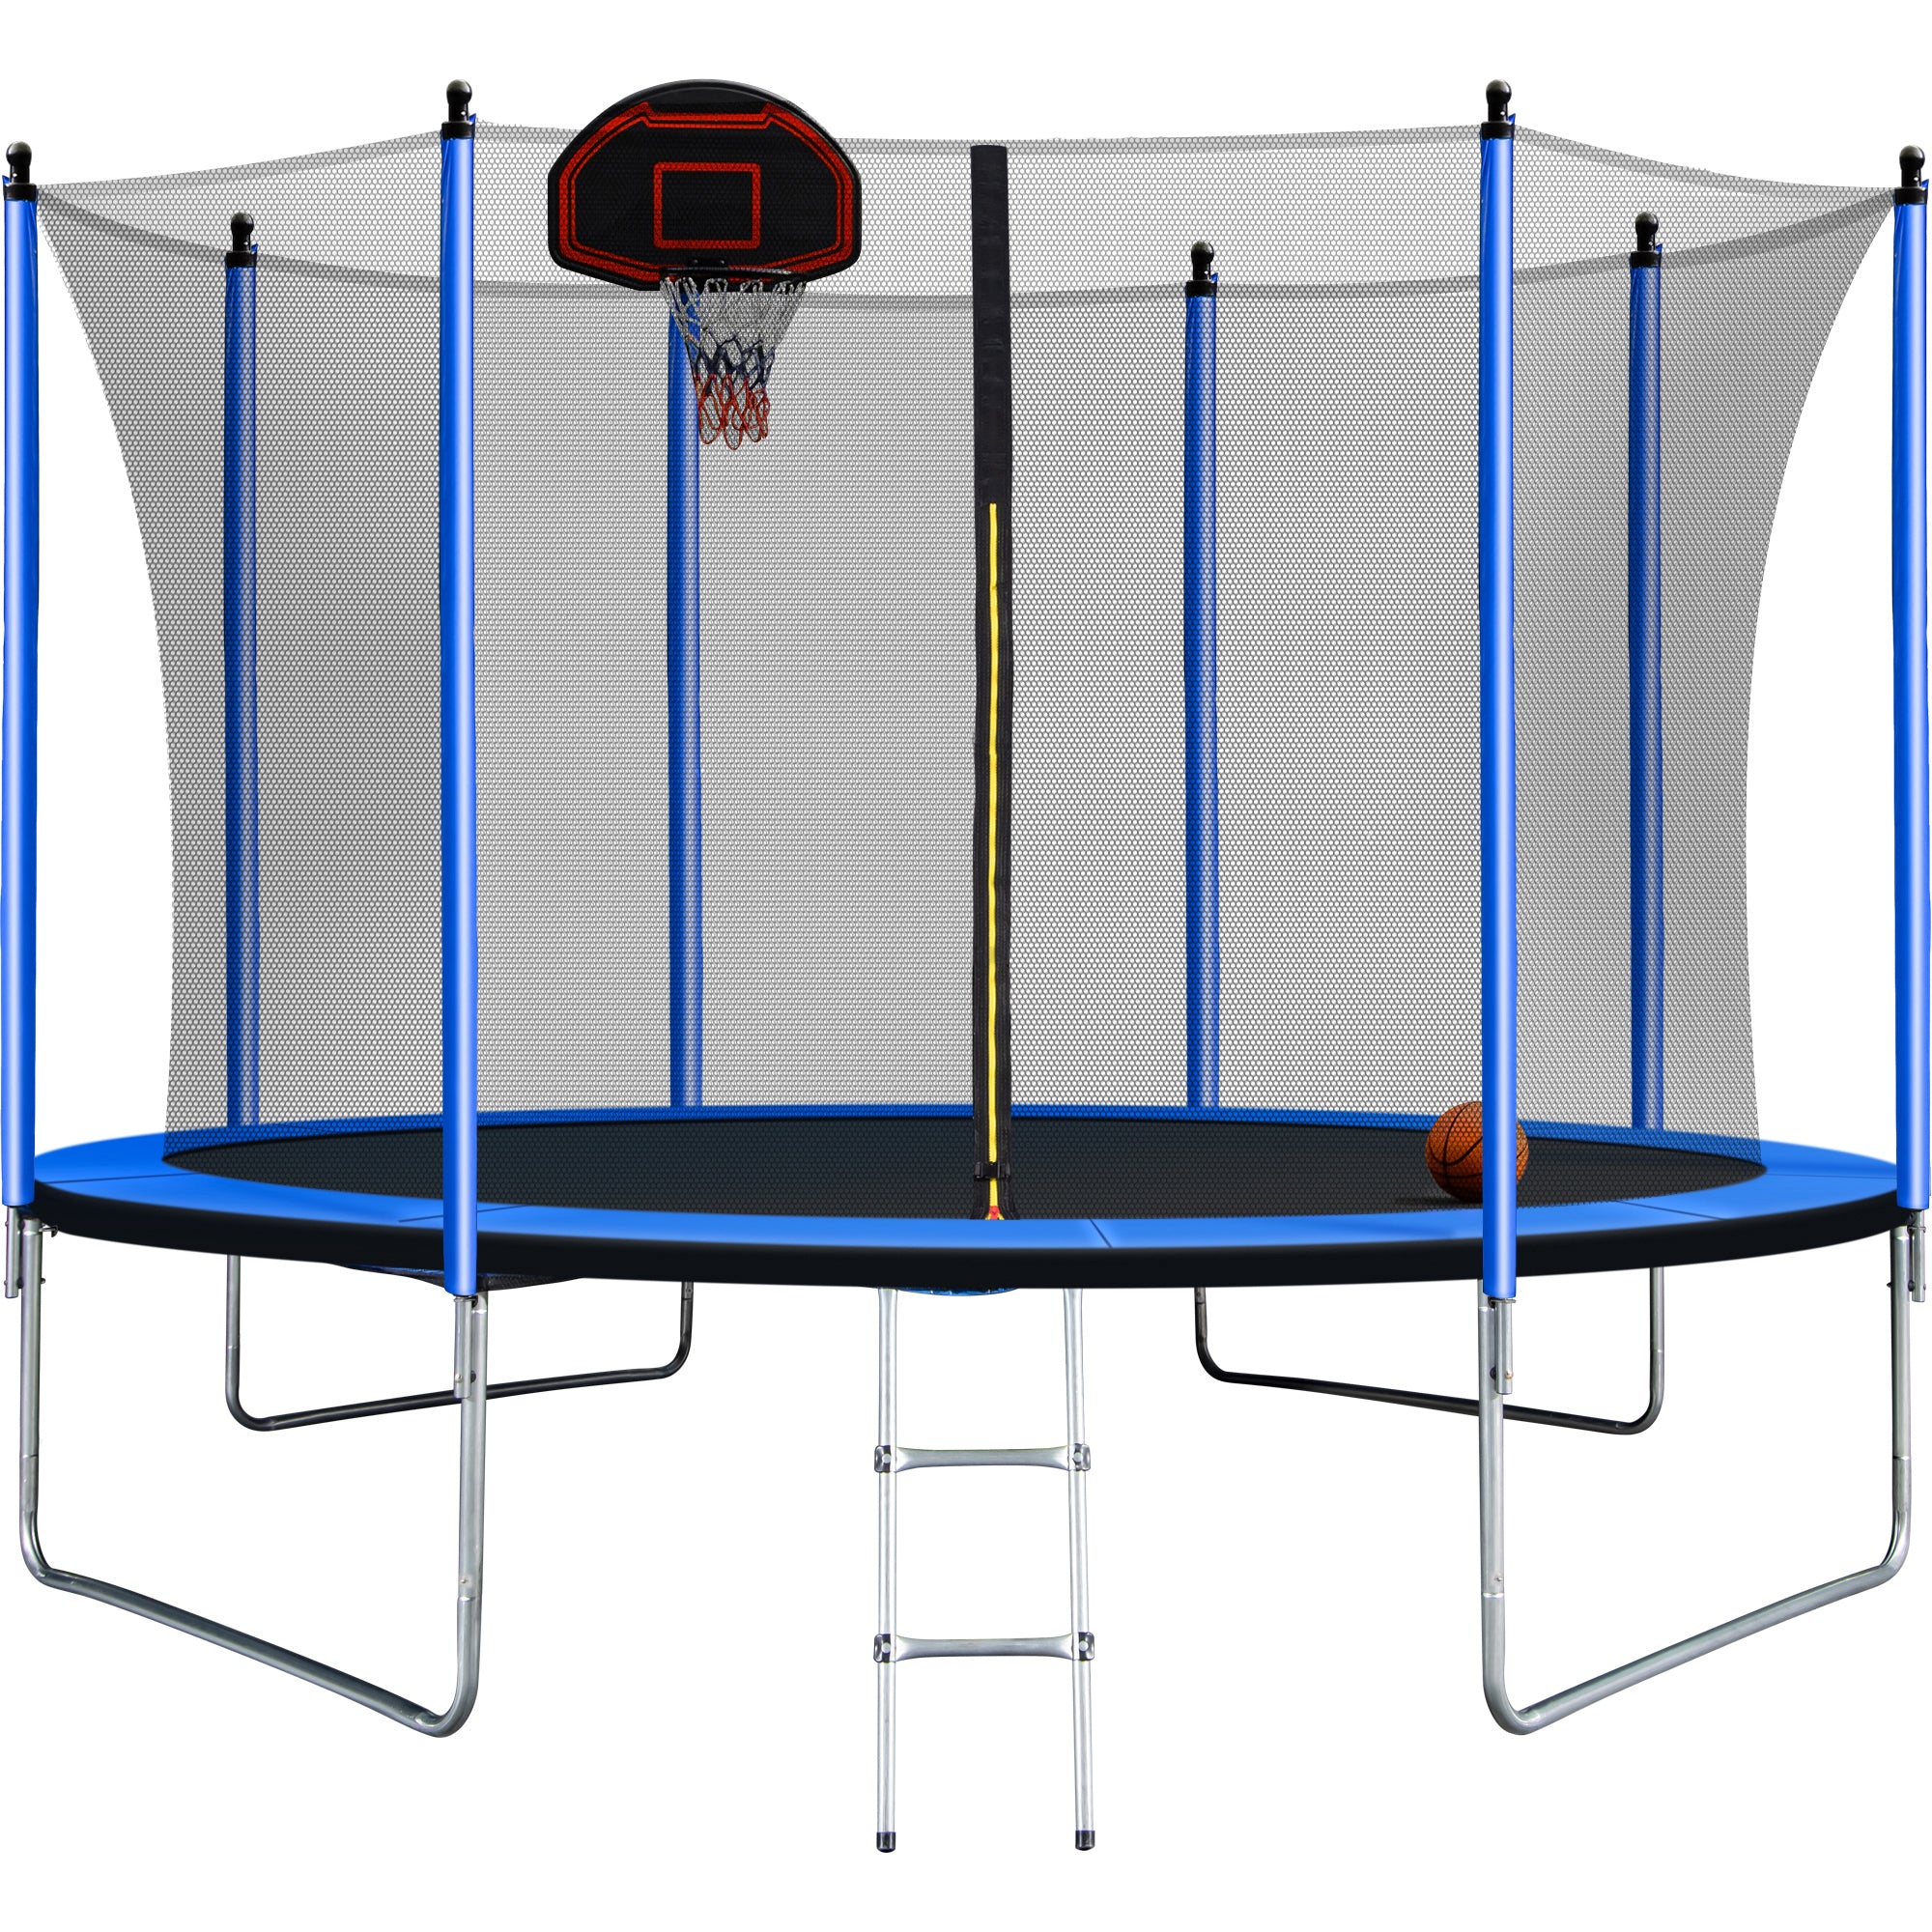 10FT Trampoline with Basketball Hoop Inflator and blue-metal